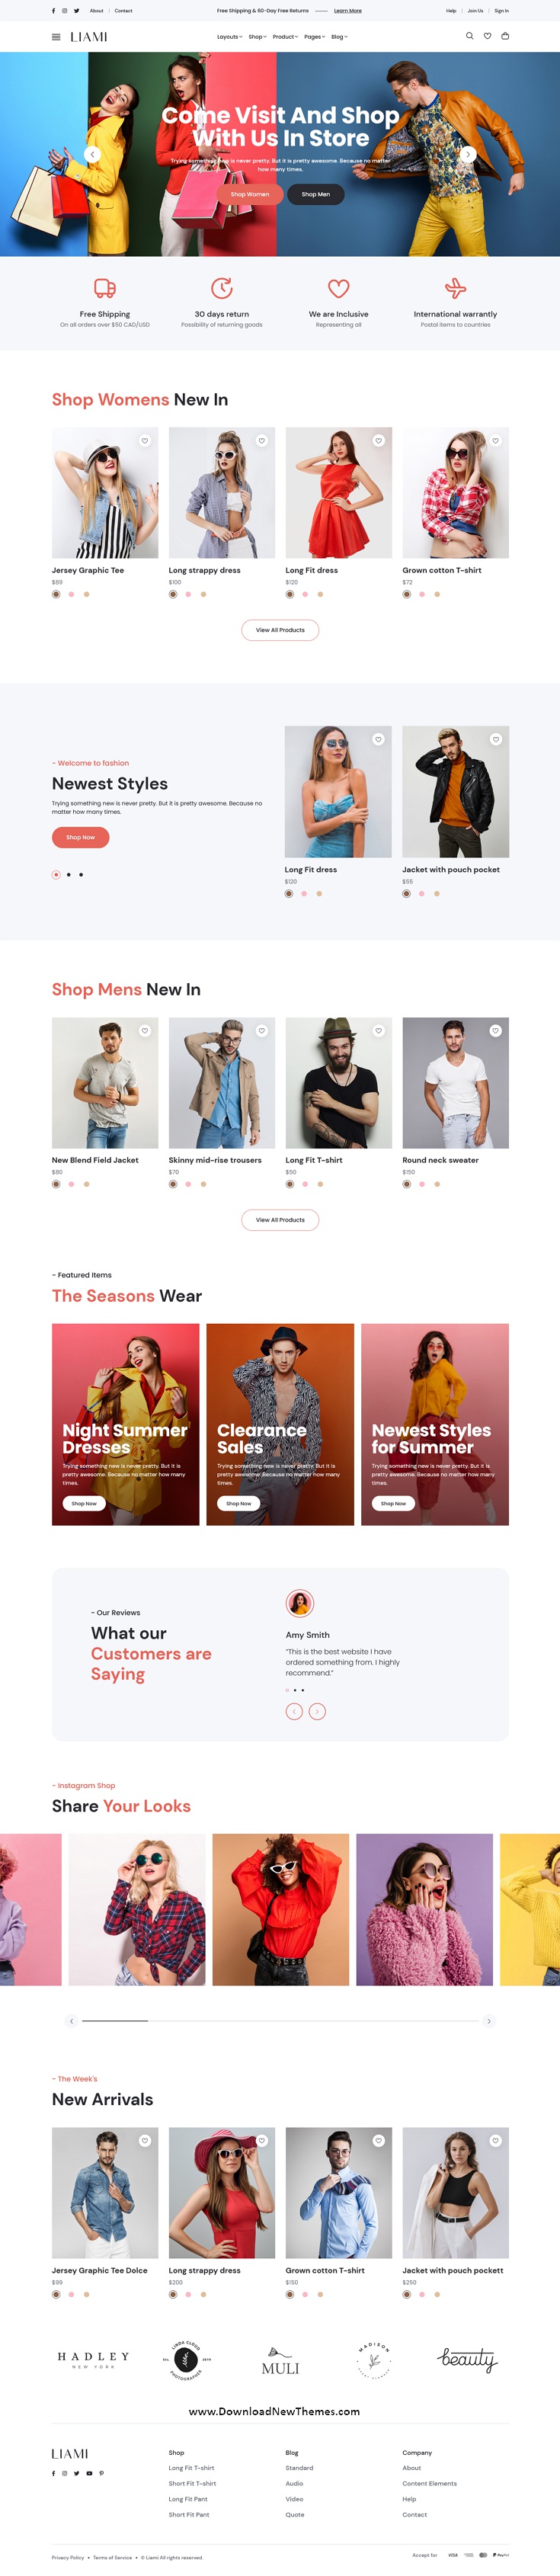 Liami - Fashion Store HTML5 Template Review